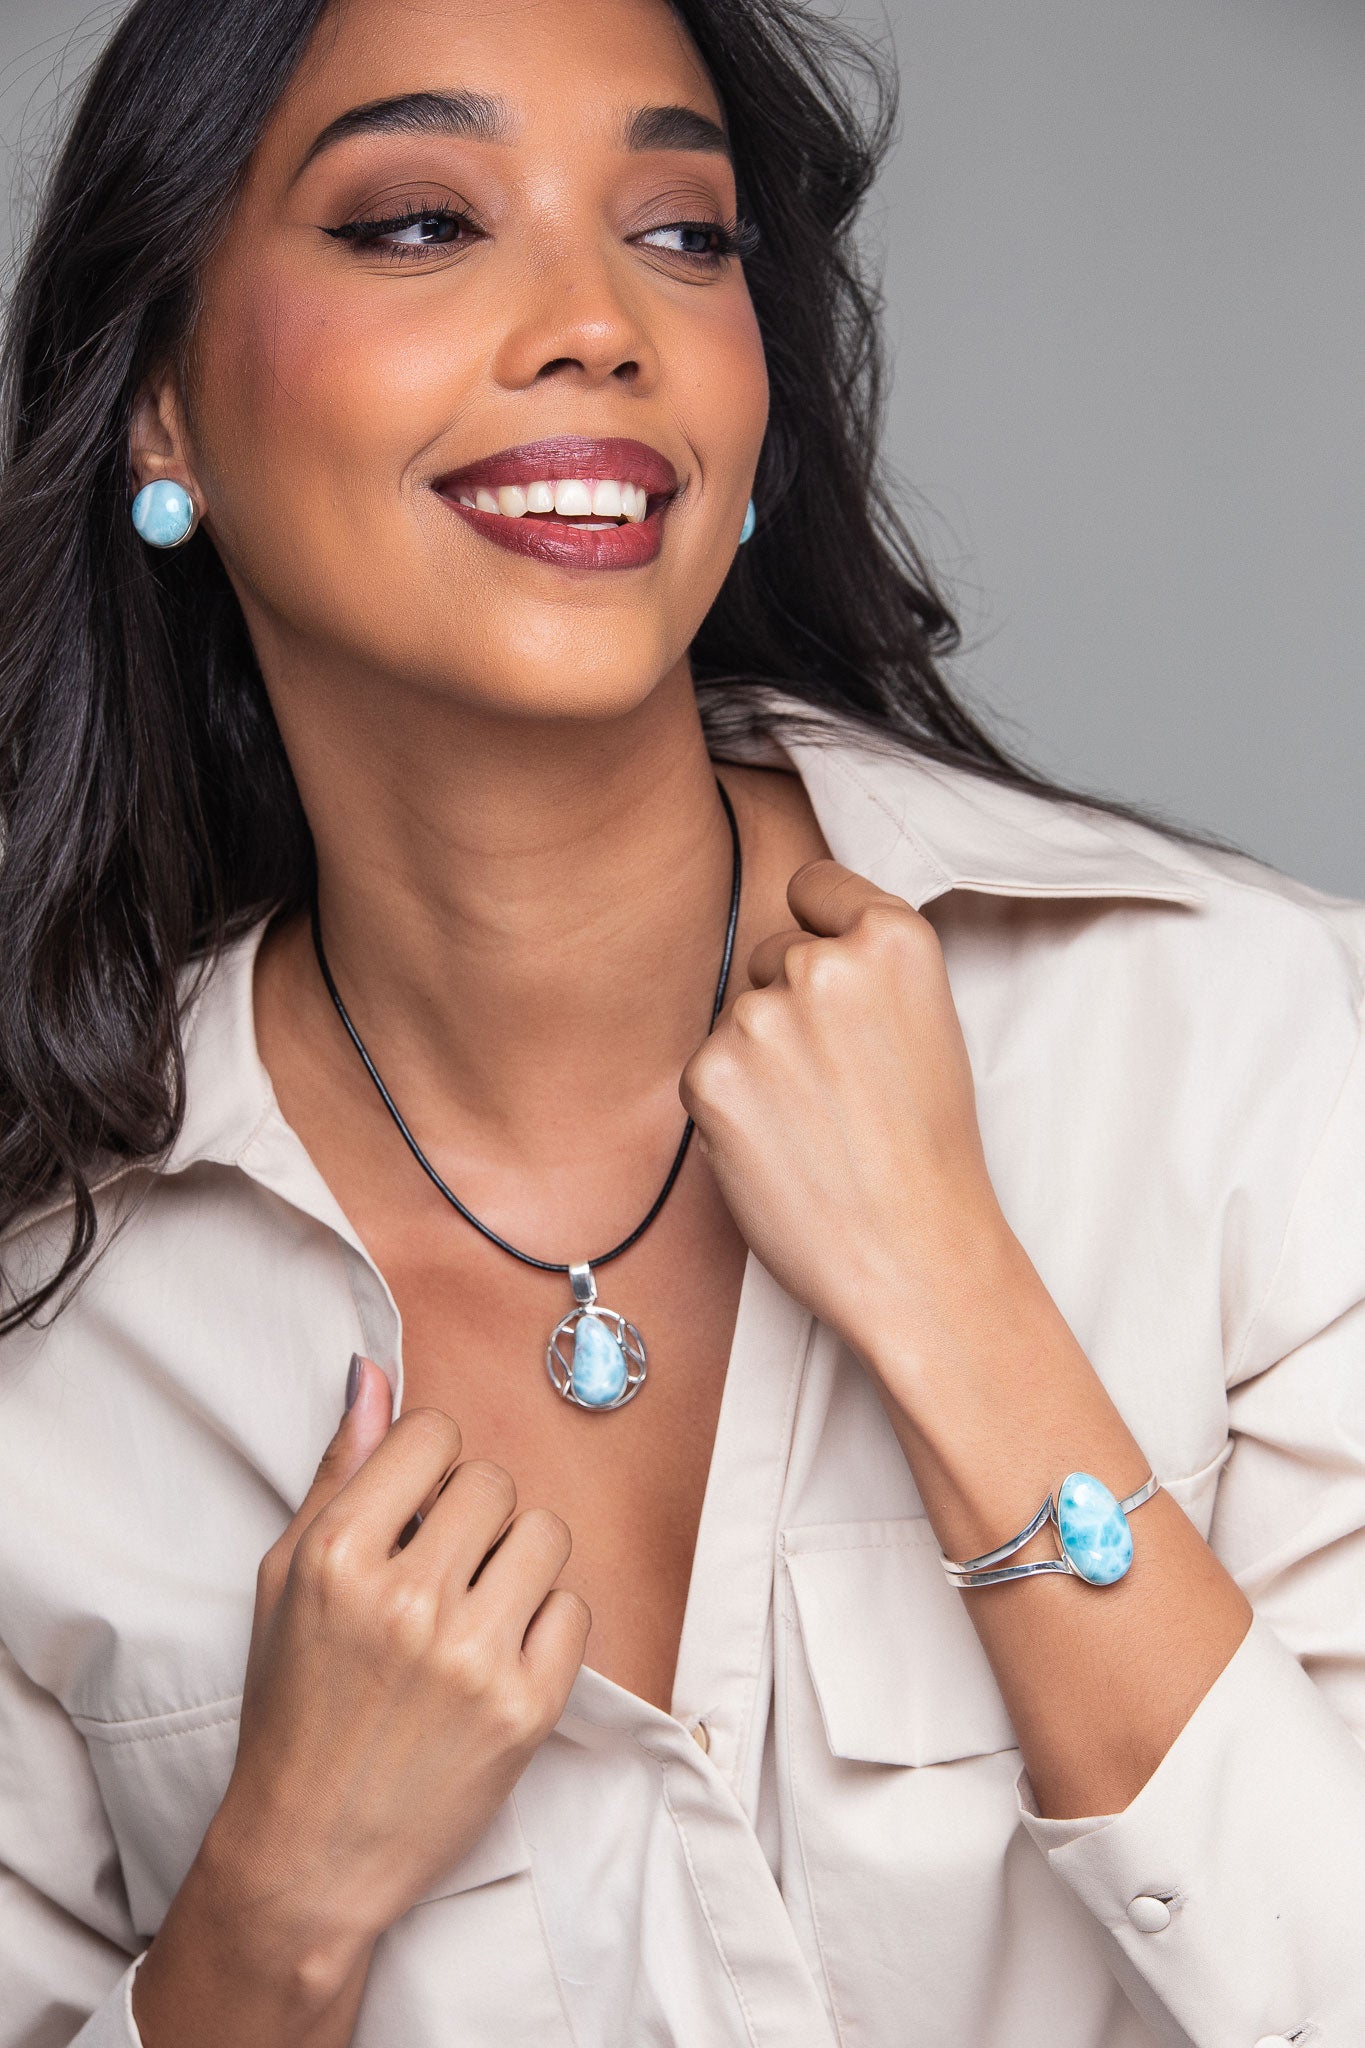 Real Larimar Jewelry by The Larimar Shop